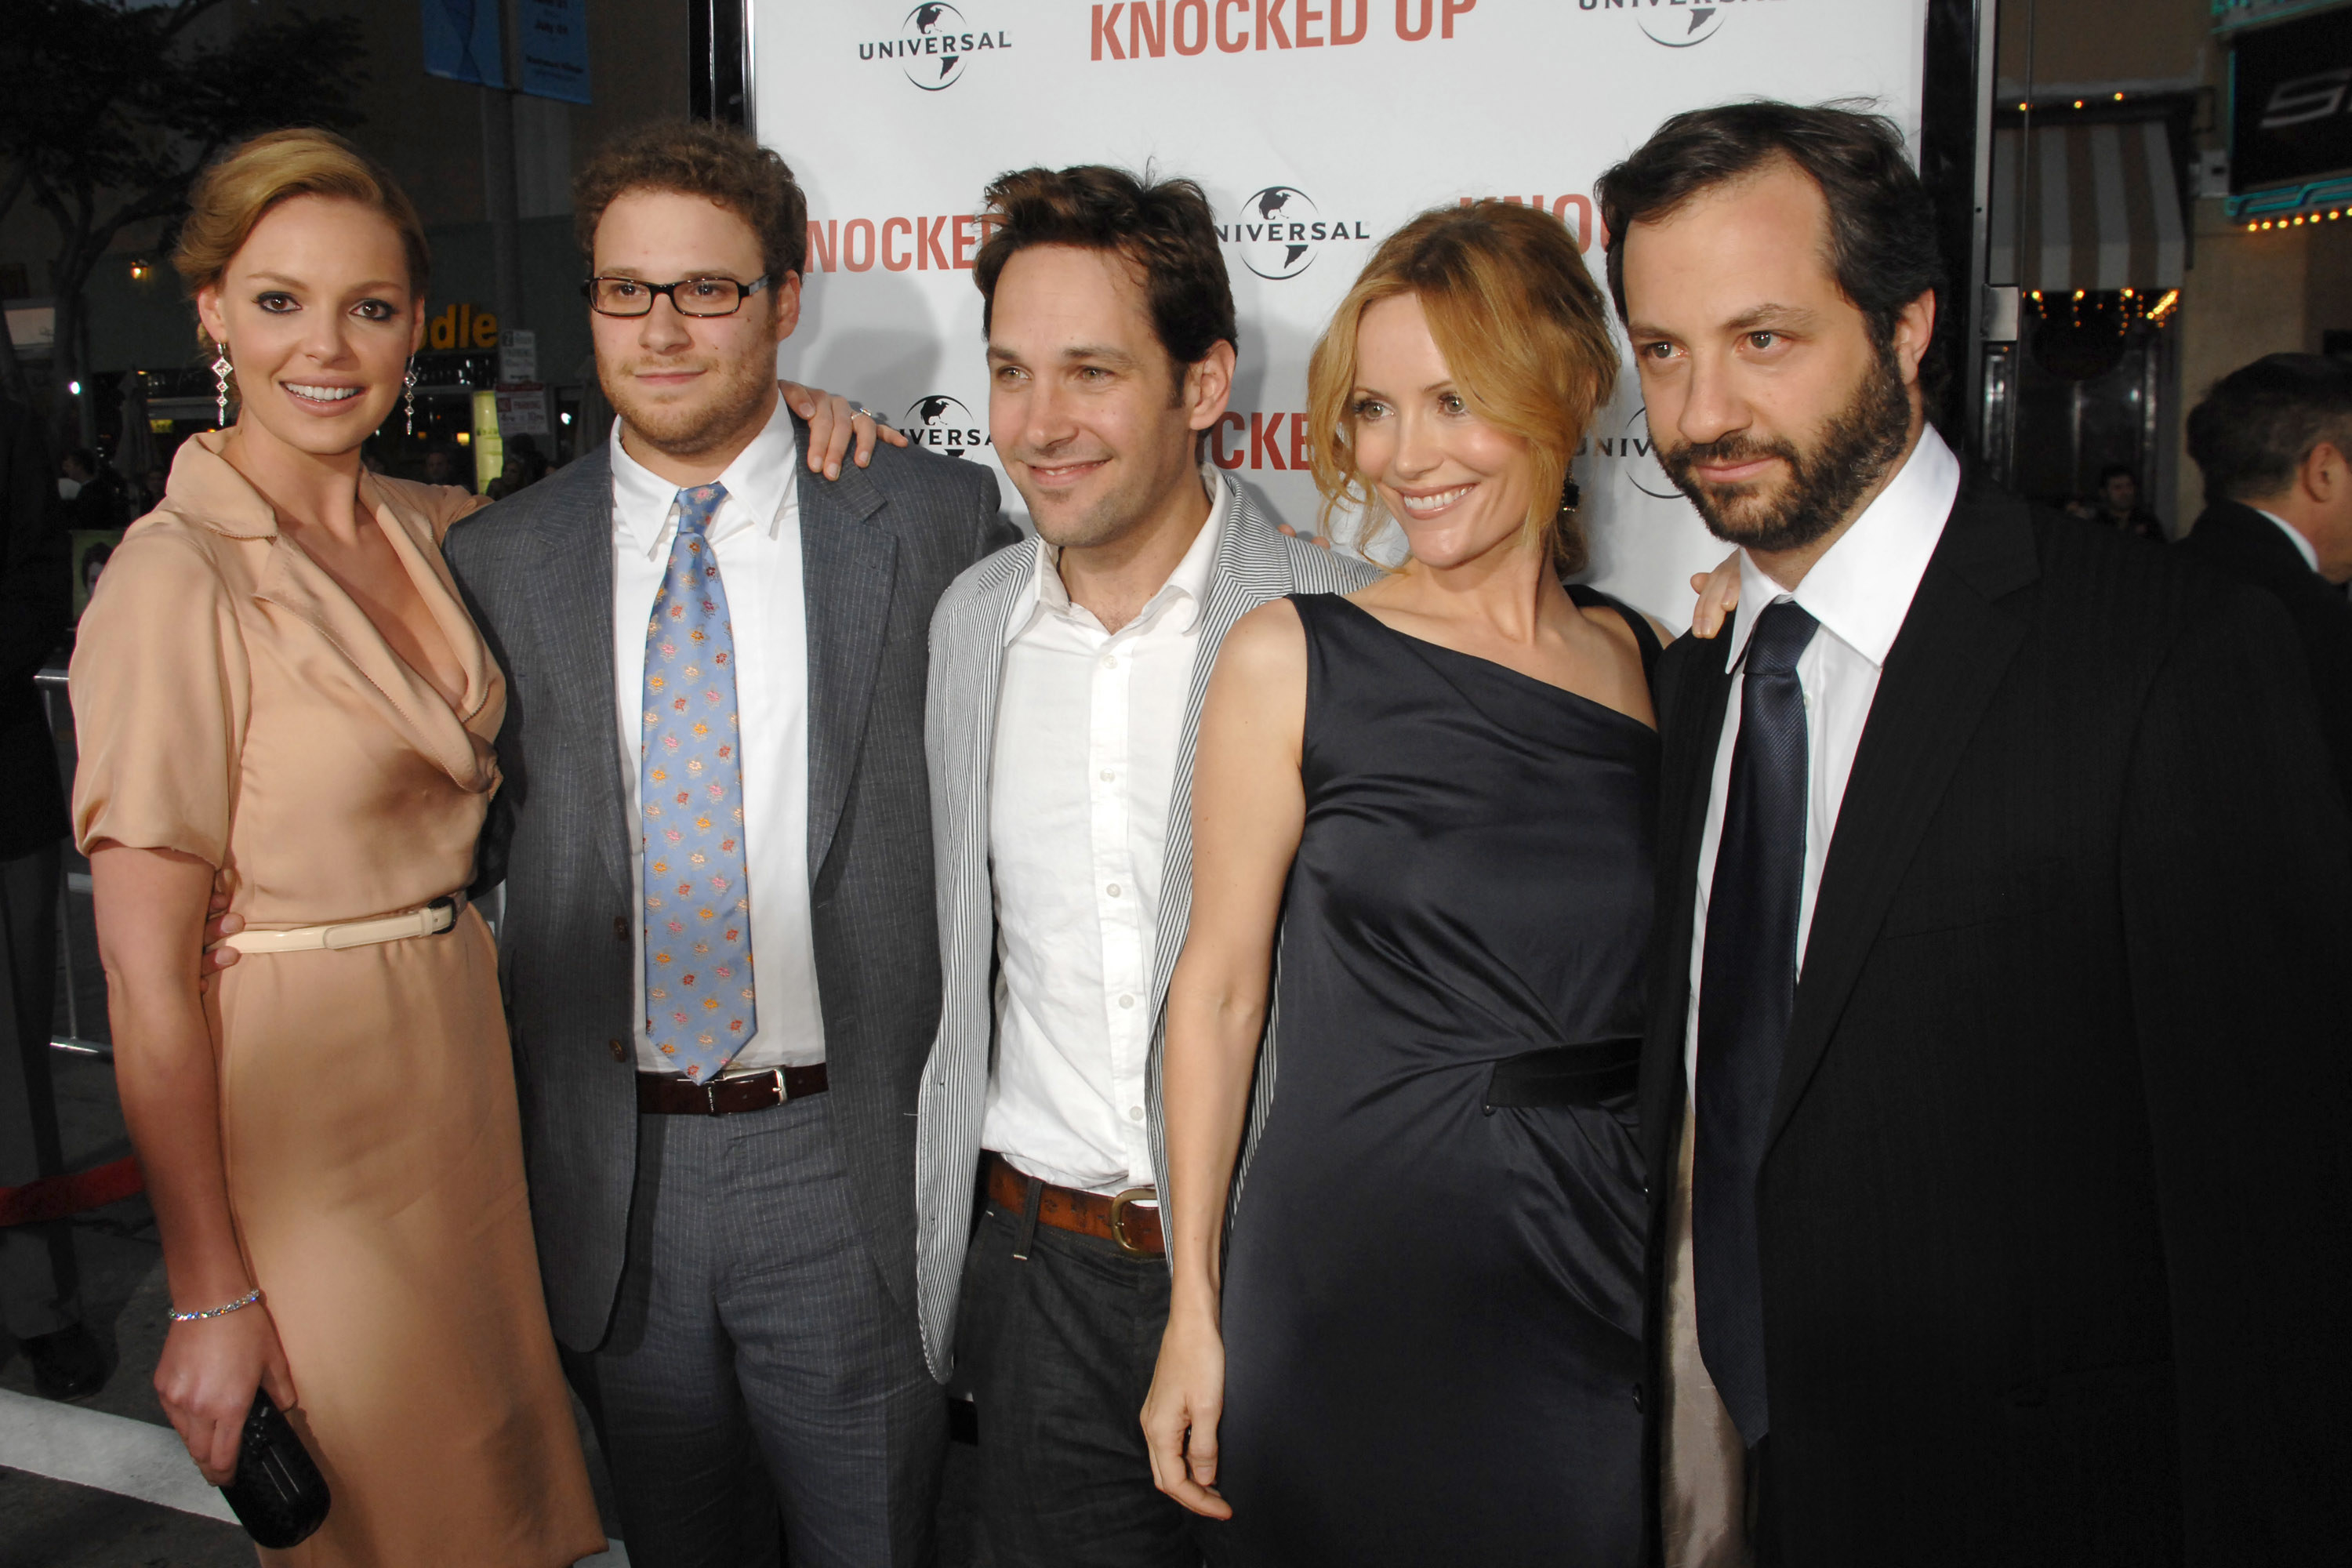 Director Judd Apatow poses with Katherine Heigl, Seth Rogen, Paul Rudd, and Leslie Mann at the premiere of &quot;Knocked Up&quot;